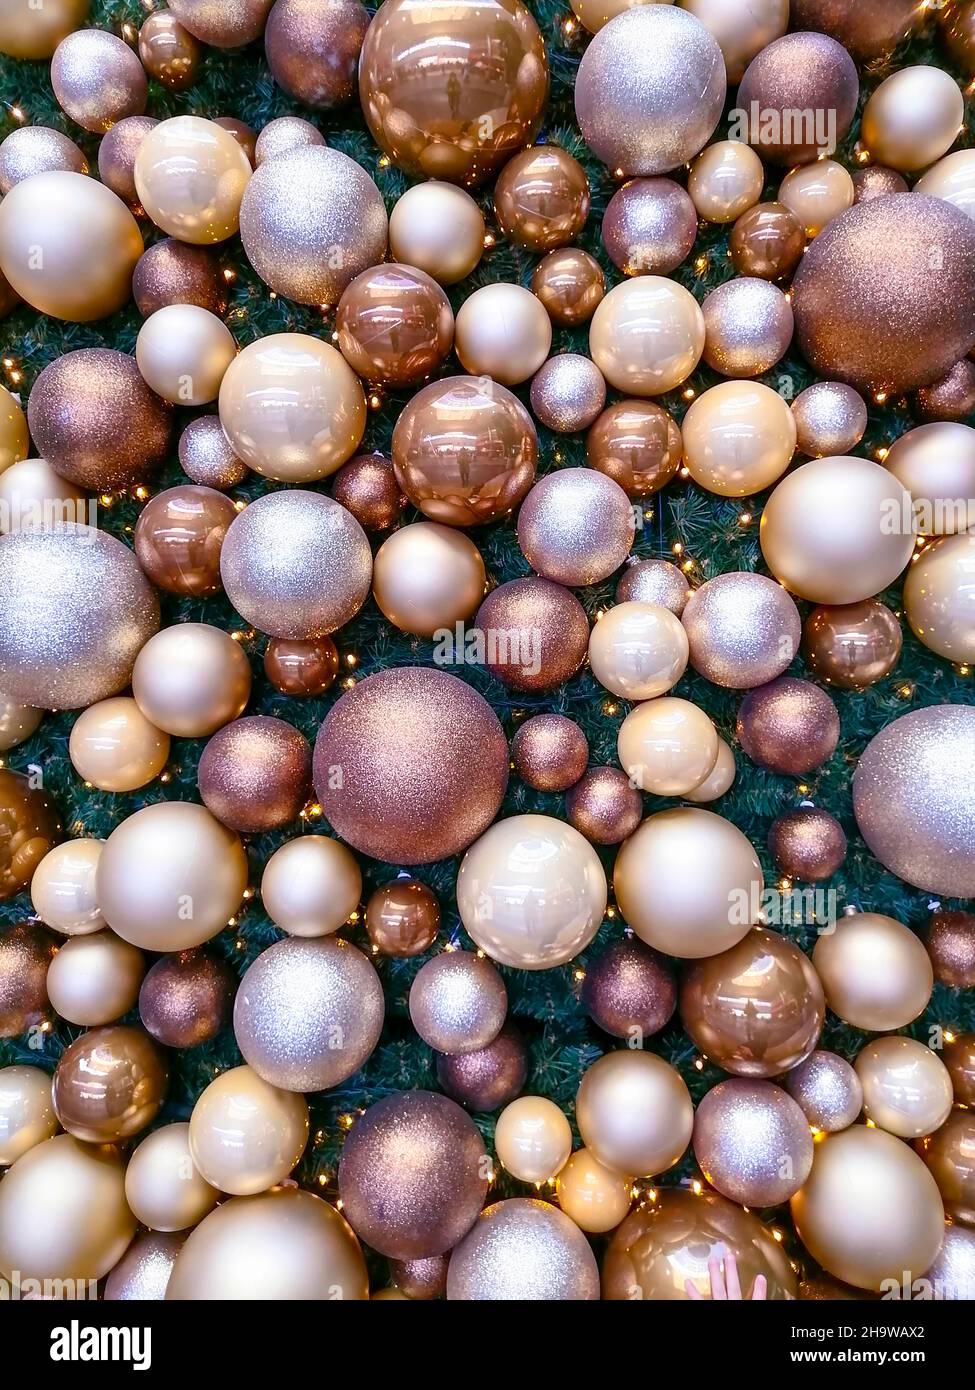 Christmas balls abstract background. Beautiful and colorful holiday decorations with globes on a Christmas tree Stock Photo